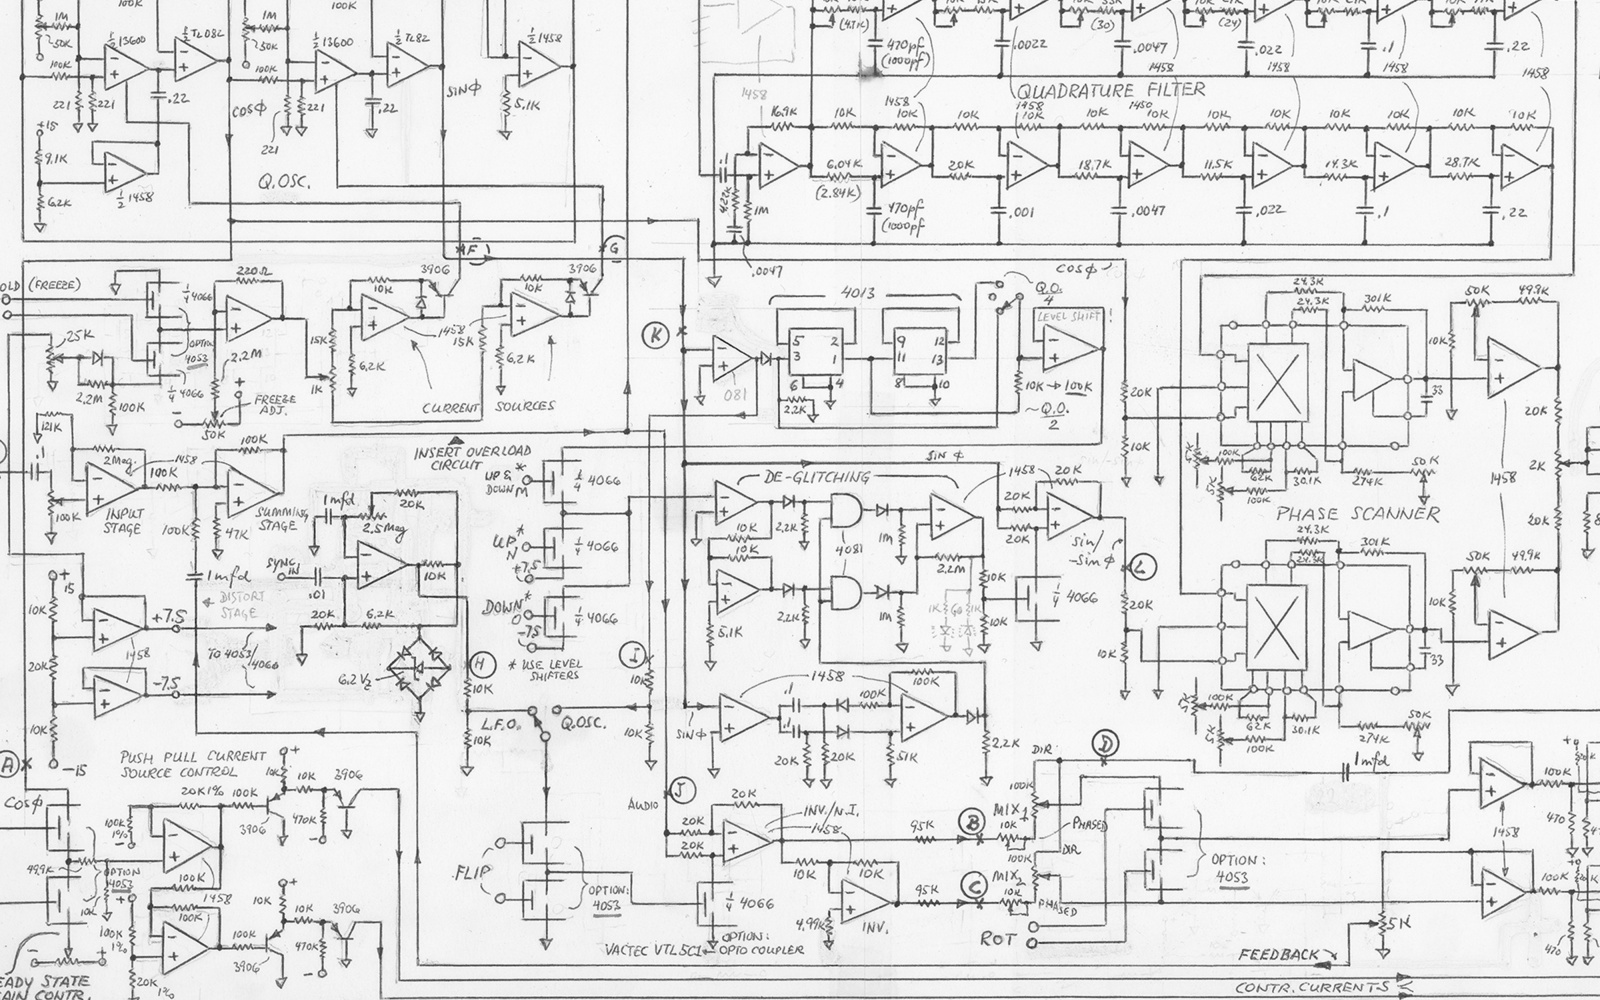 Circuit diagram by Harald Bode